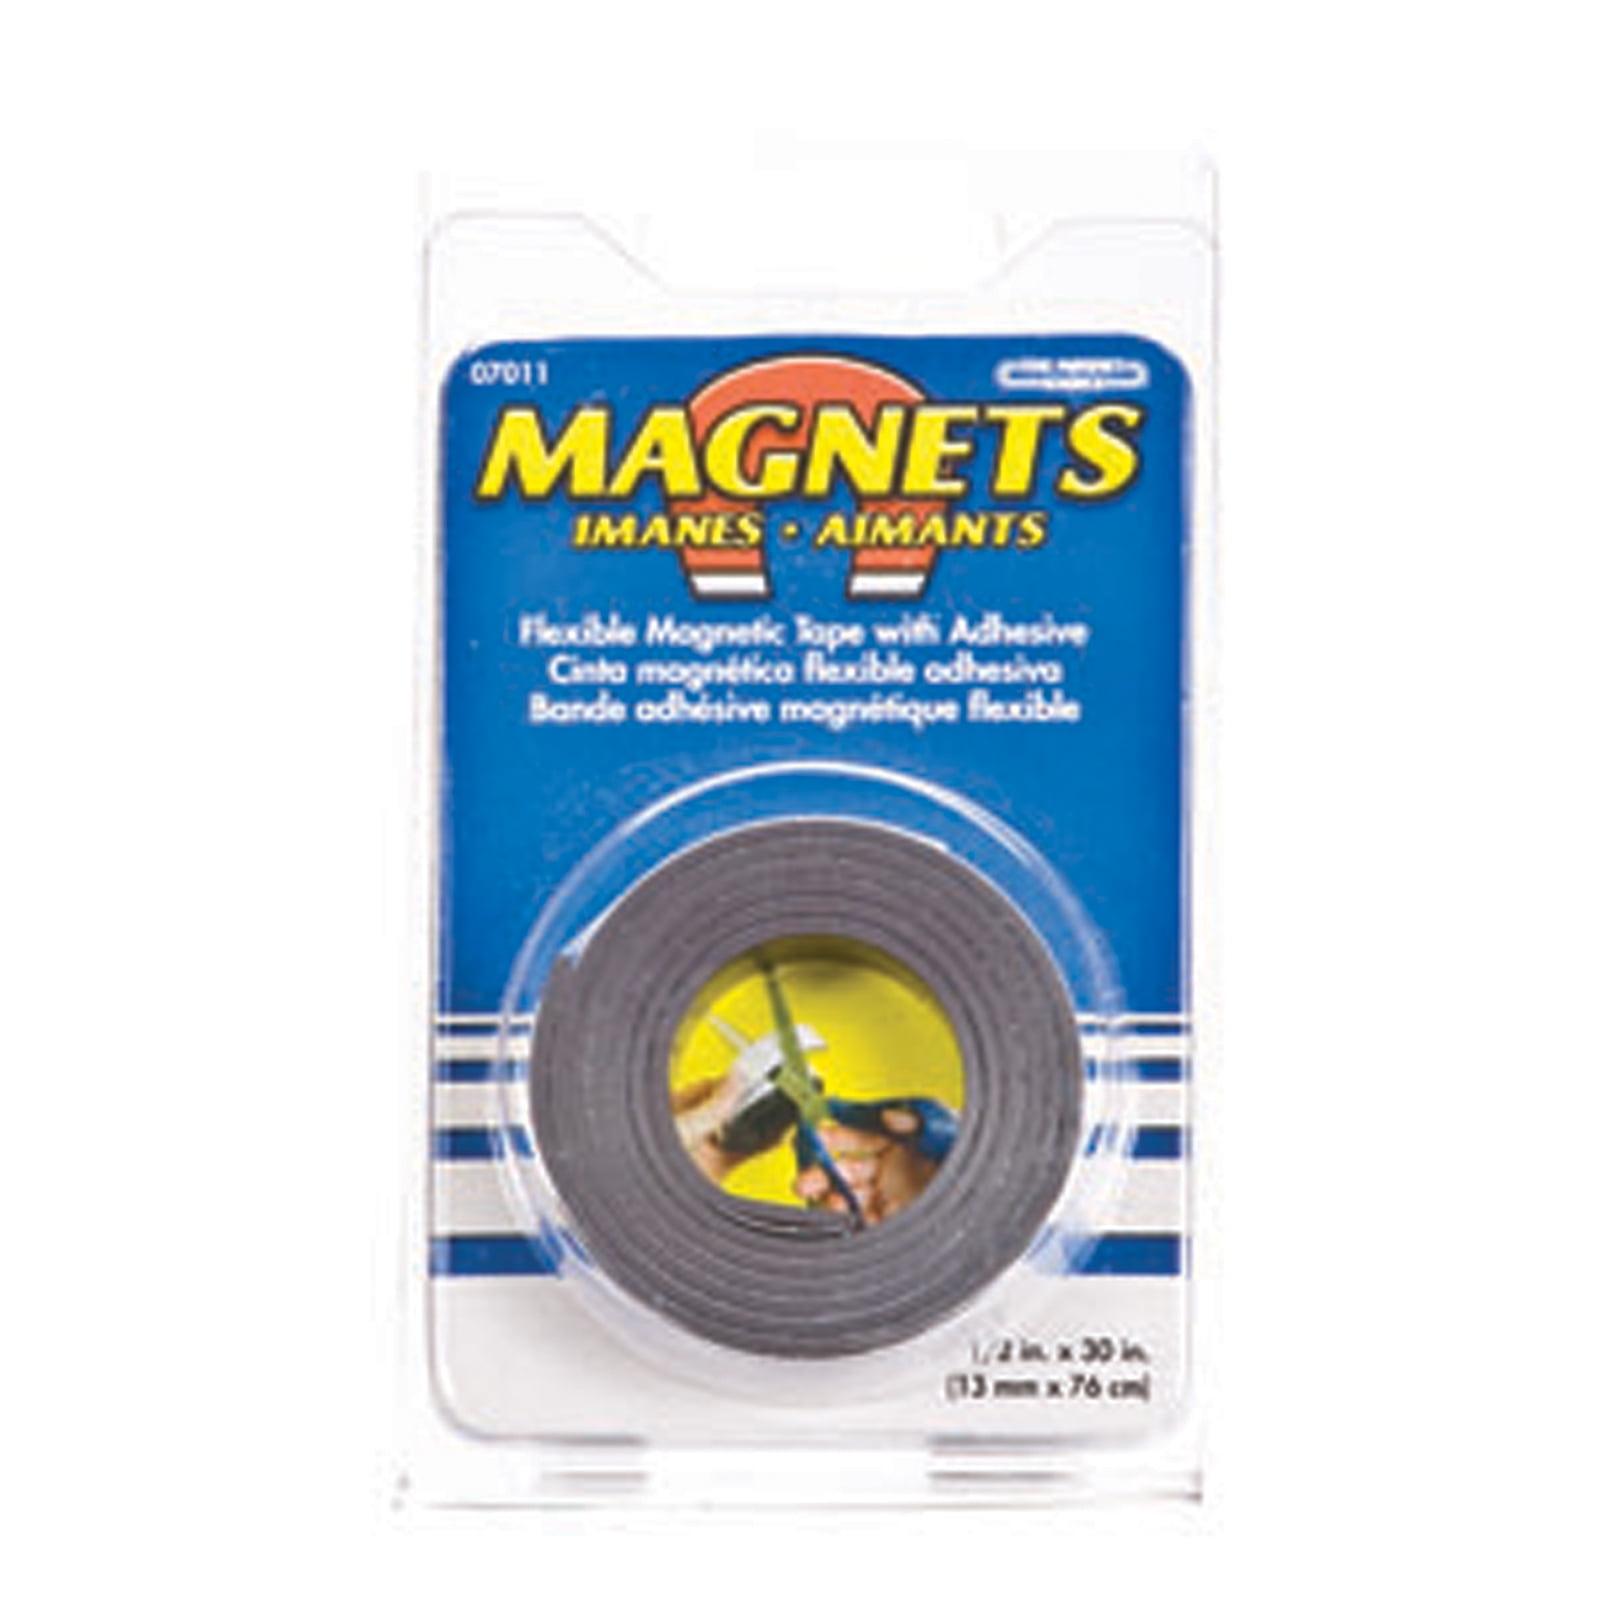 Promag Adhesive Magnetic Roll - 1/2 x 30